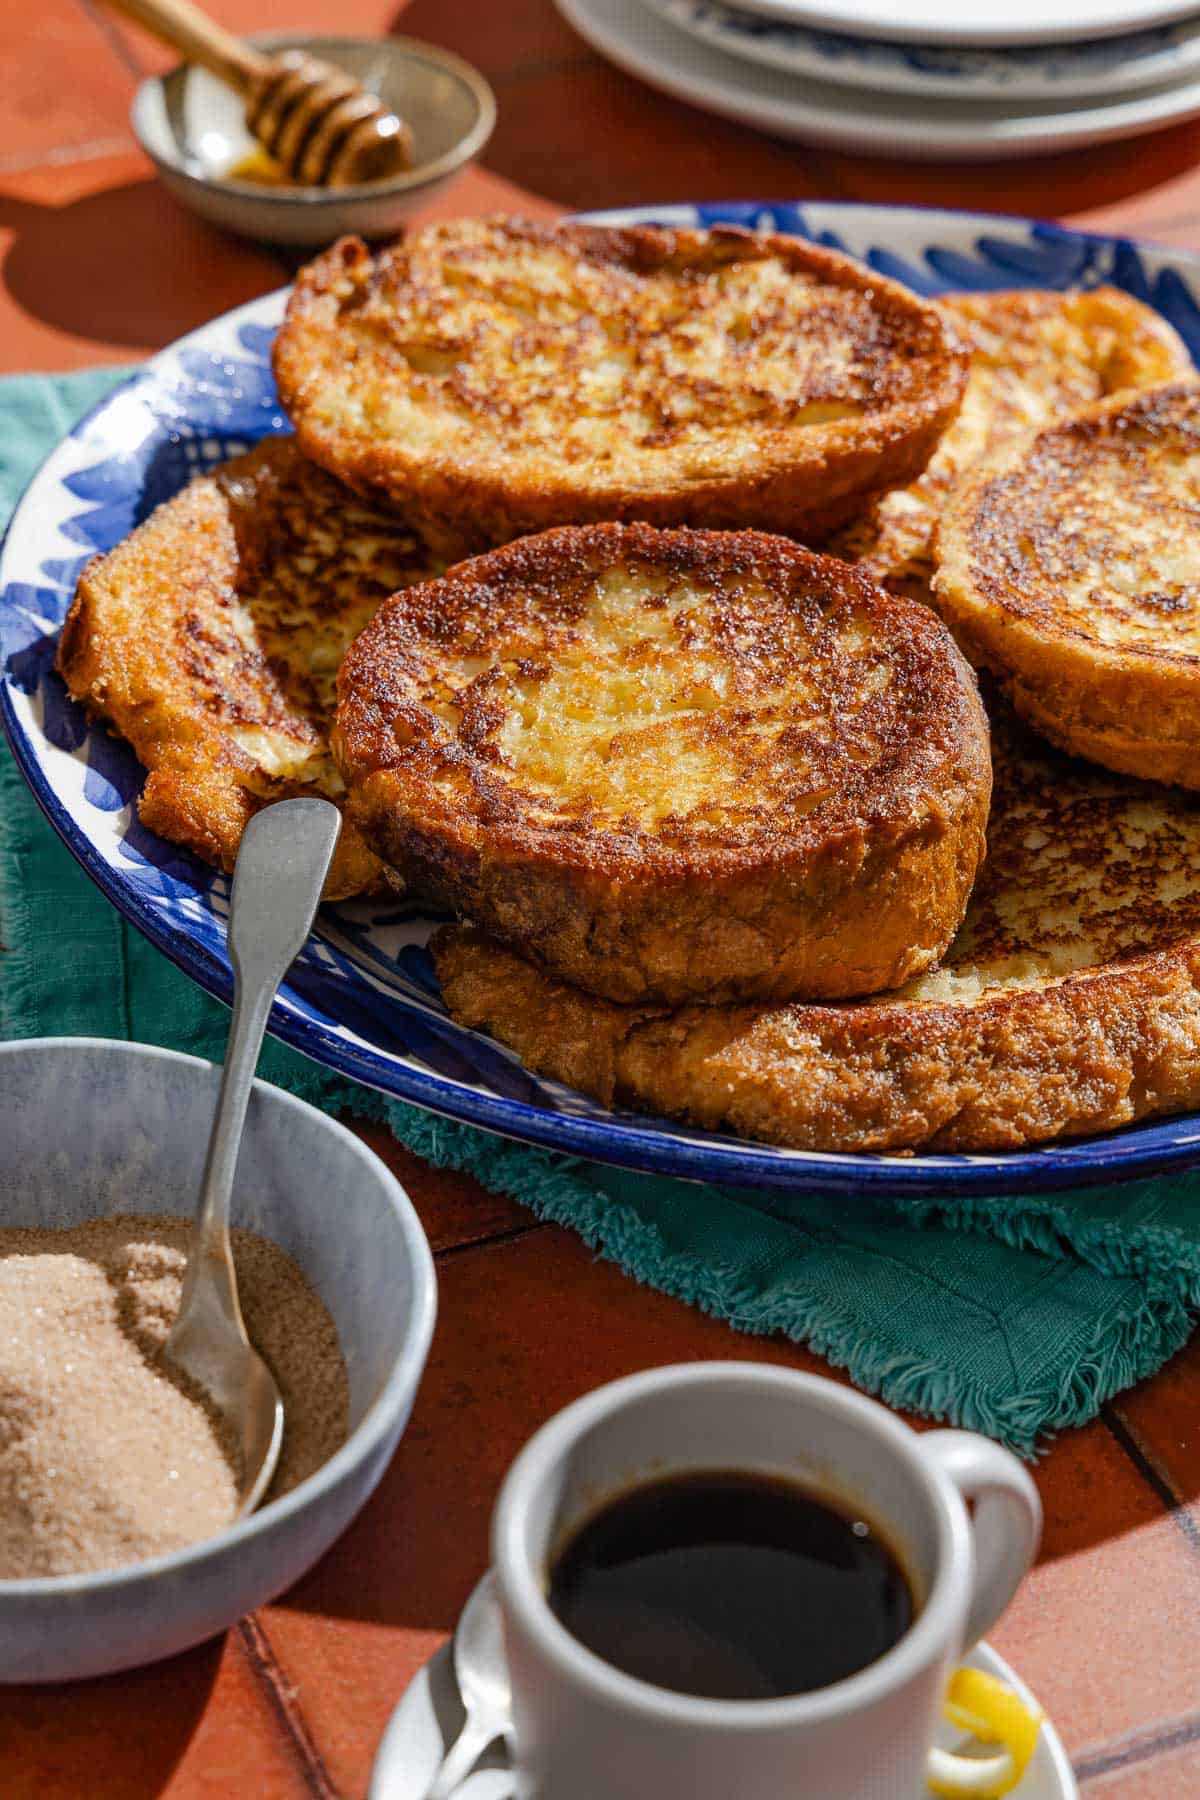 Several torrijas on a serving platter surrounded by bowls of honey and cinnamon sugar, and a cup of coffee.